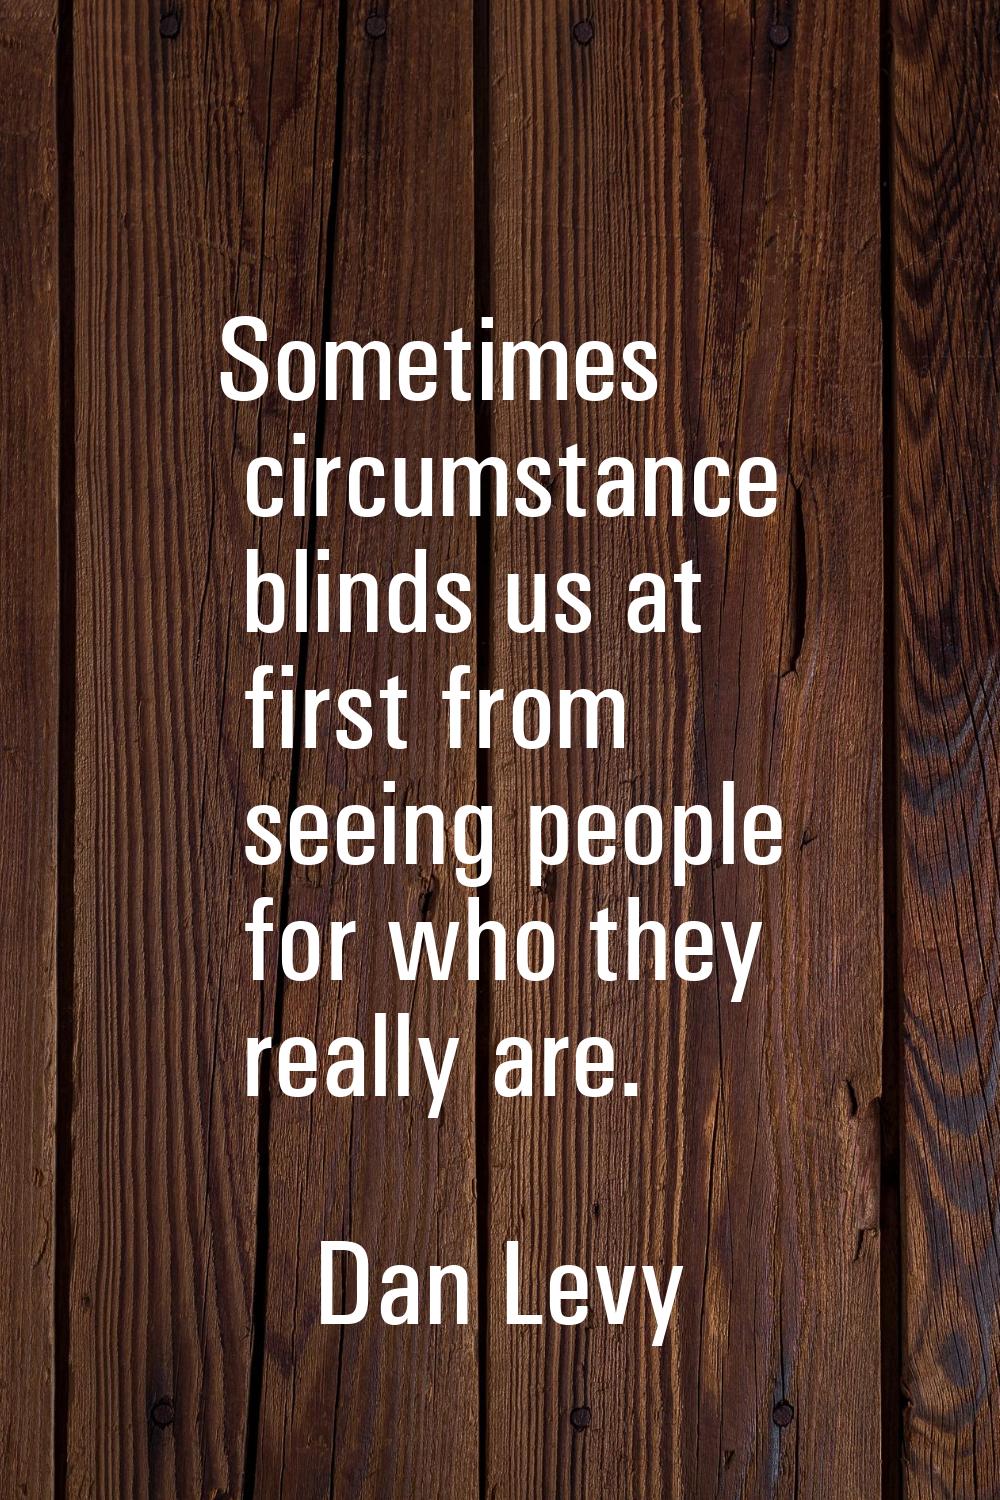 Sometimes circumstance blinds us at first from seeing people for who they really are.